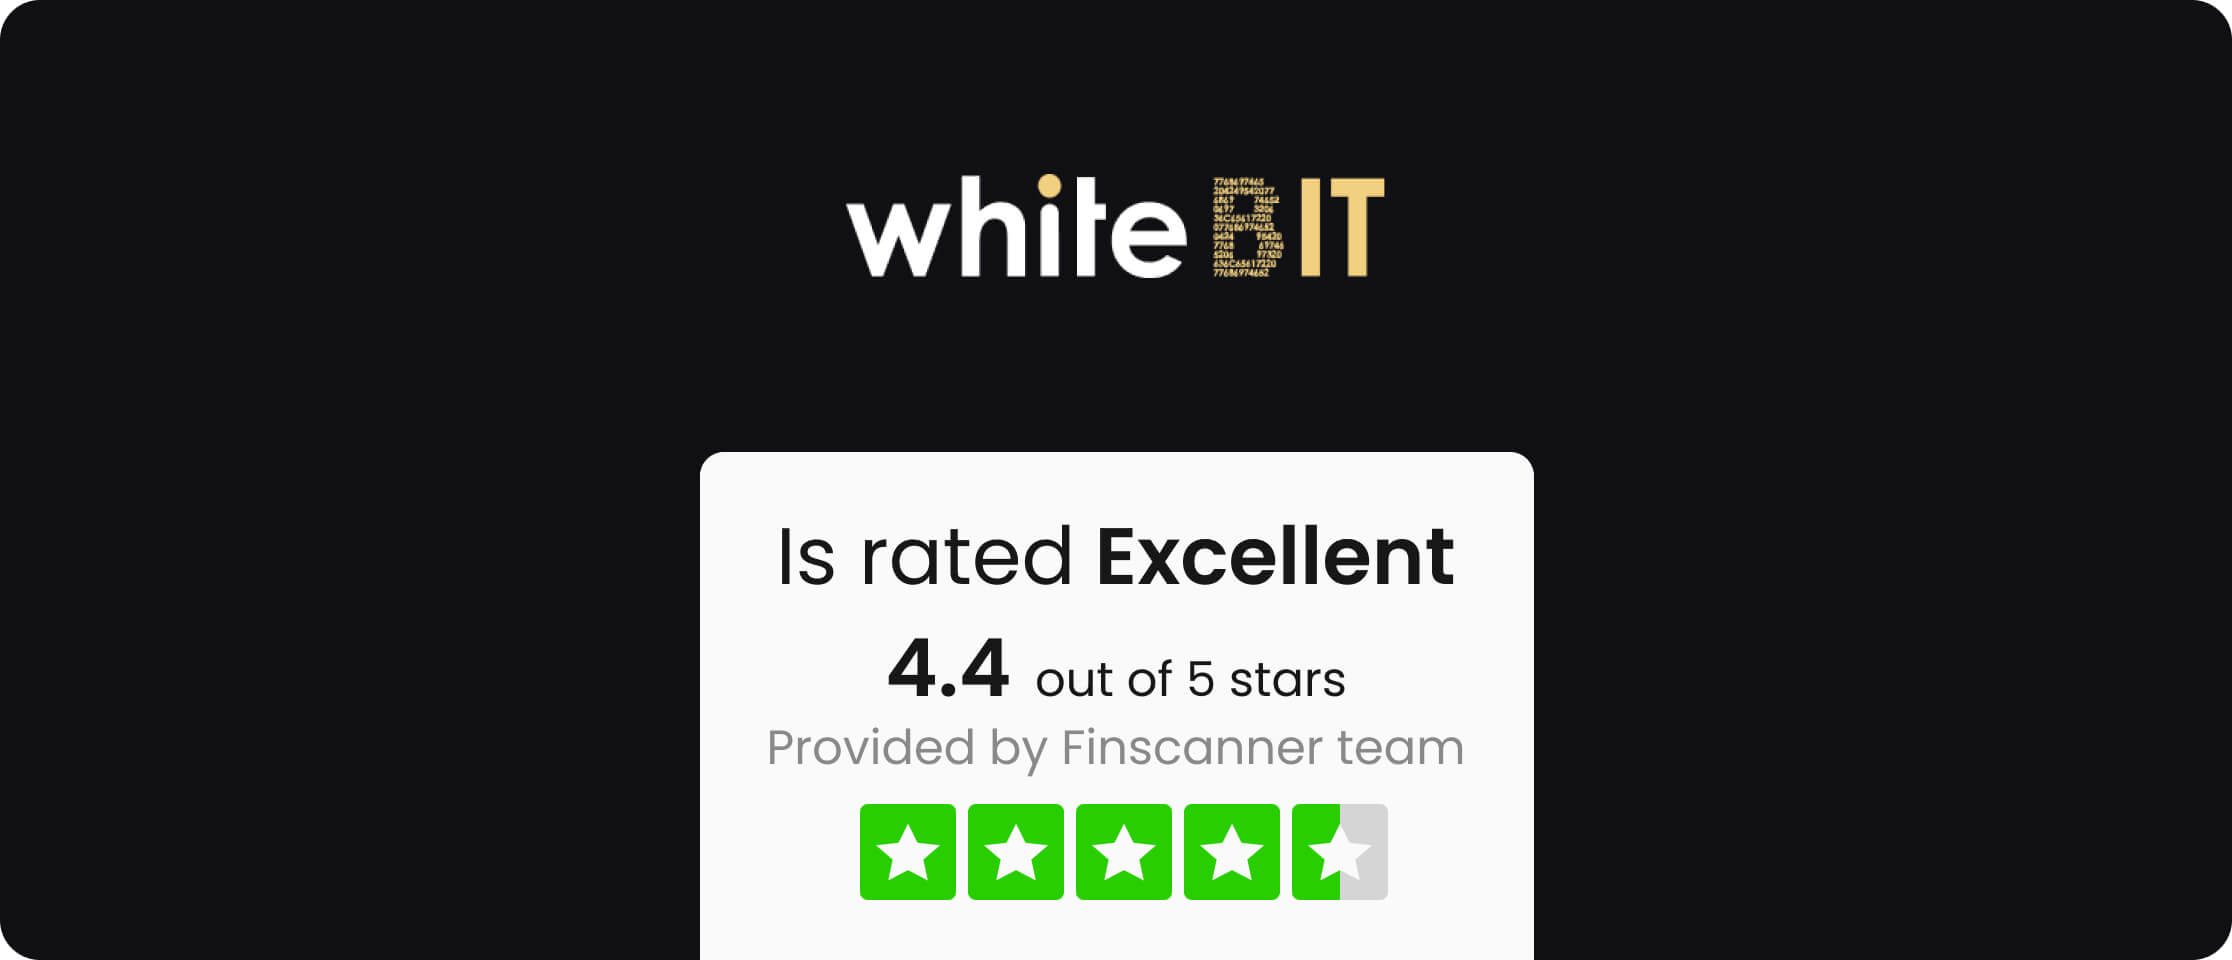 Review of WhiteBIT—Take Investments To The Next Level